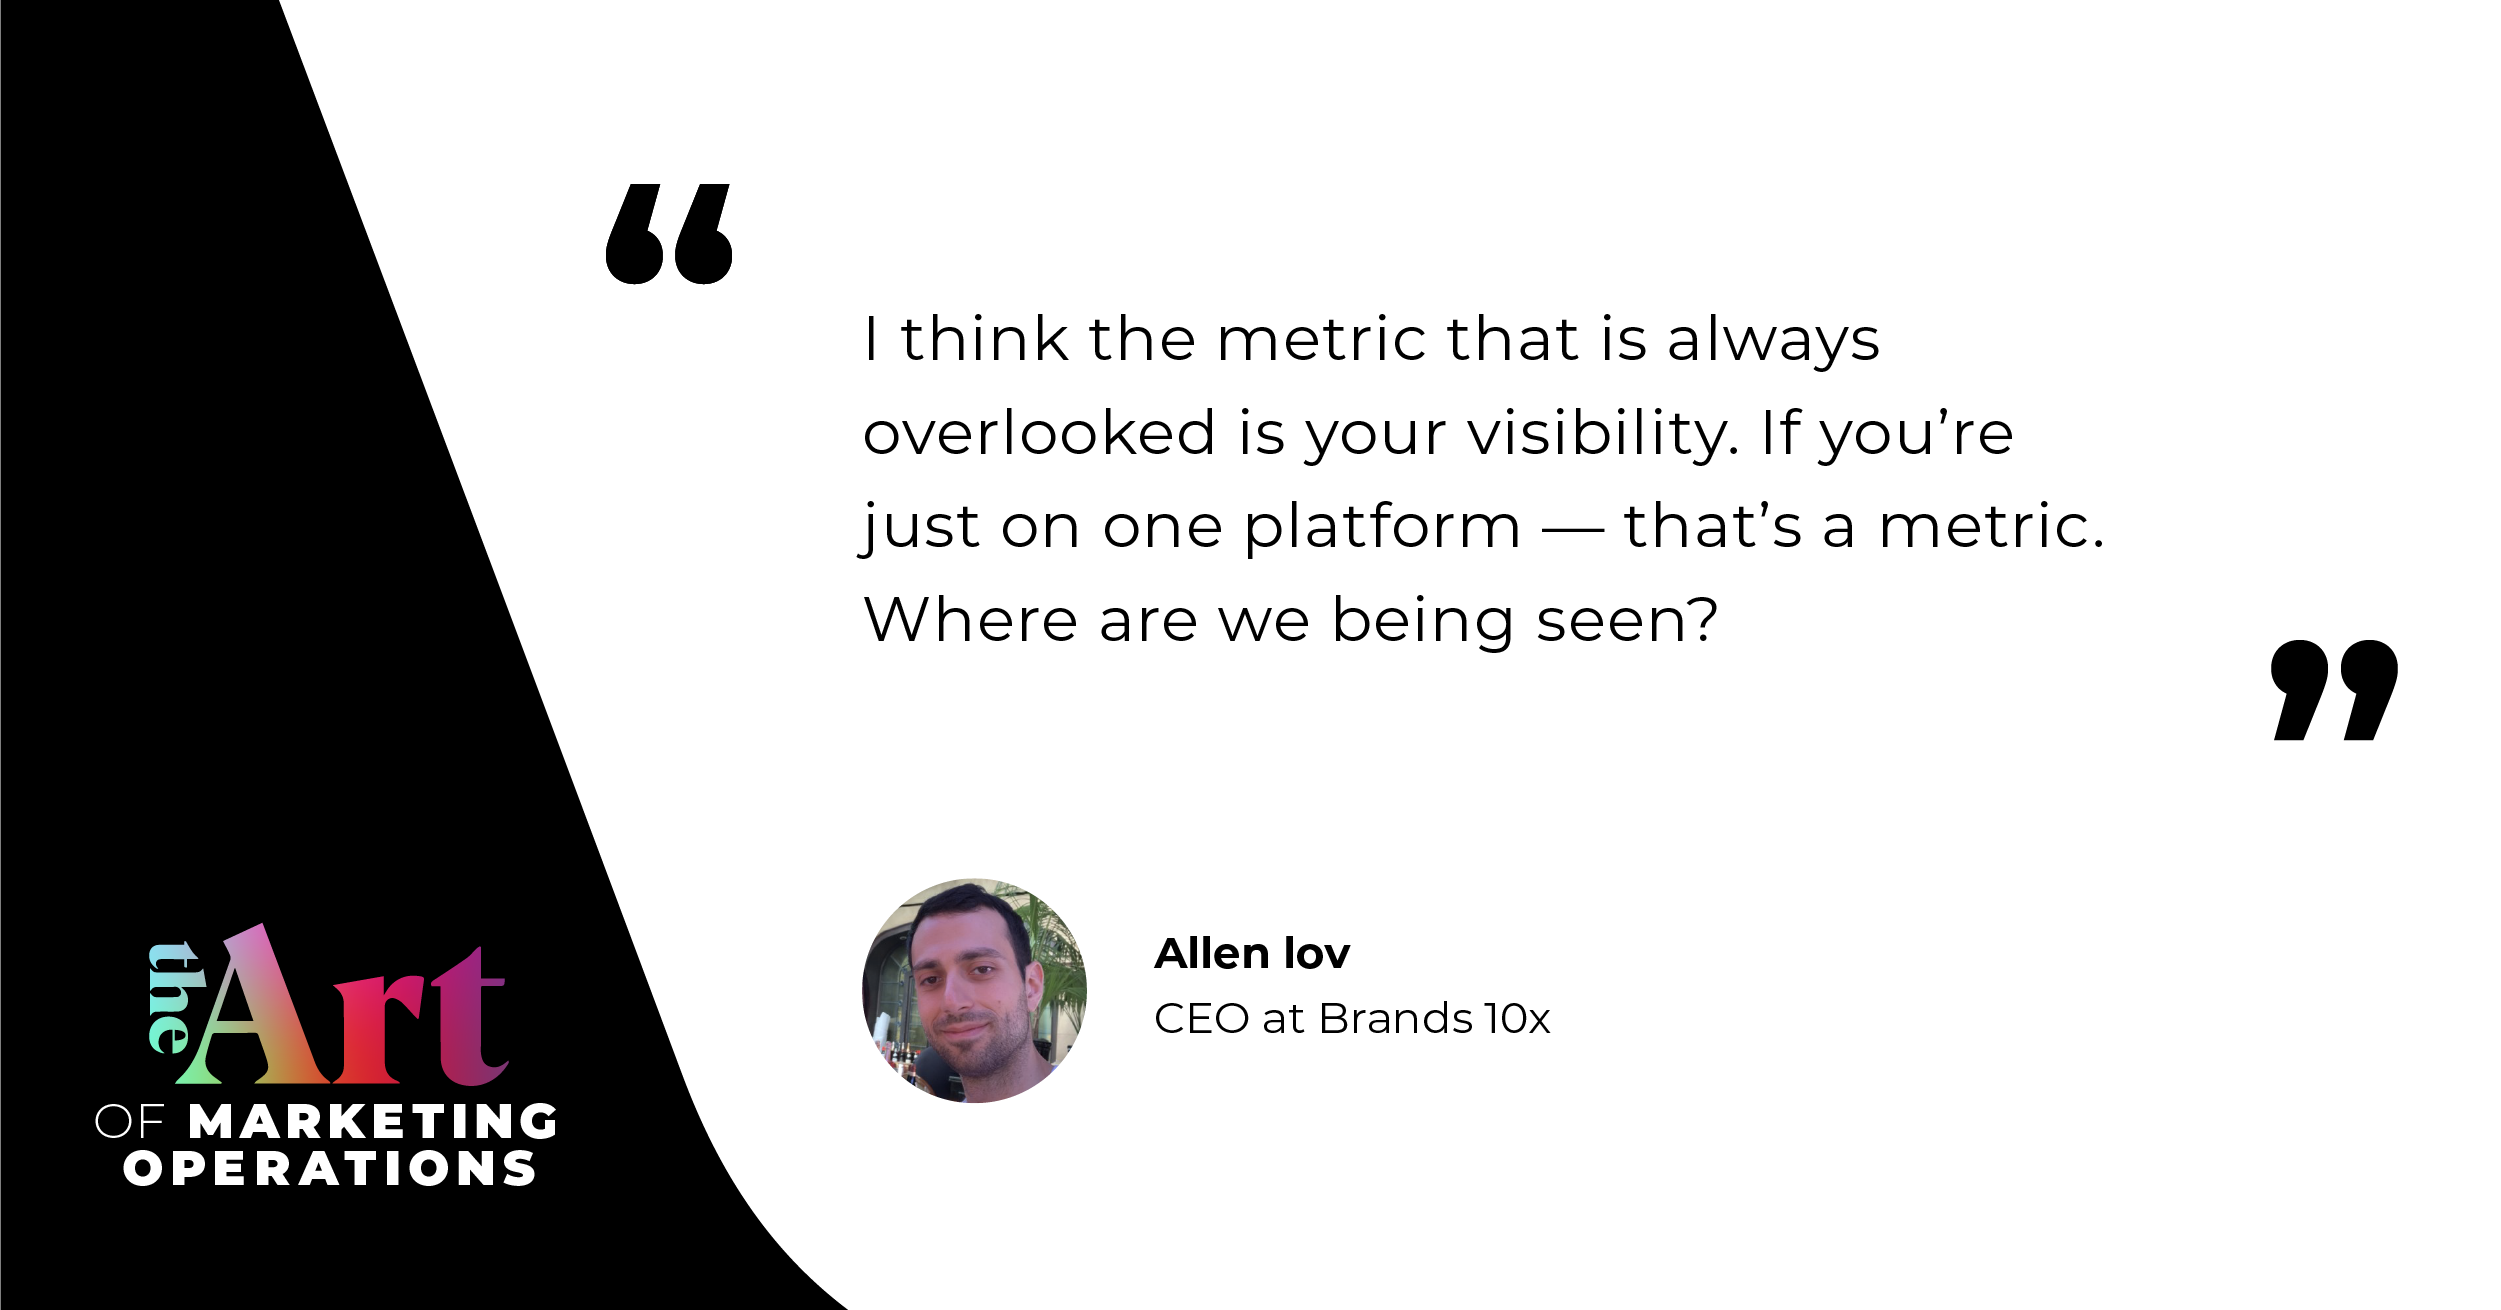 Quote by Allen Iov: “I think the metric that is always overlooked is your visibility. If you're just on one platform — that's a metric. Where are we being seen?”